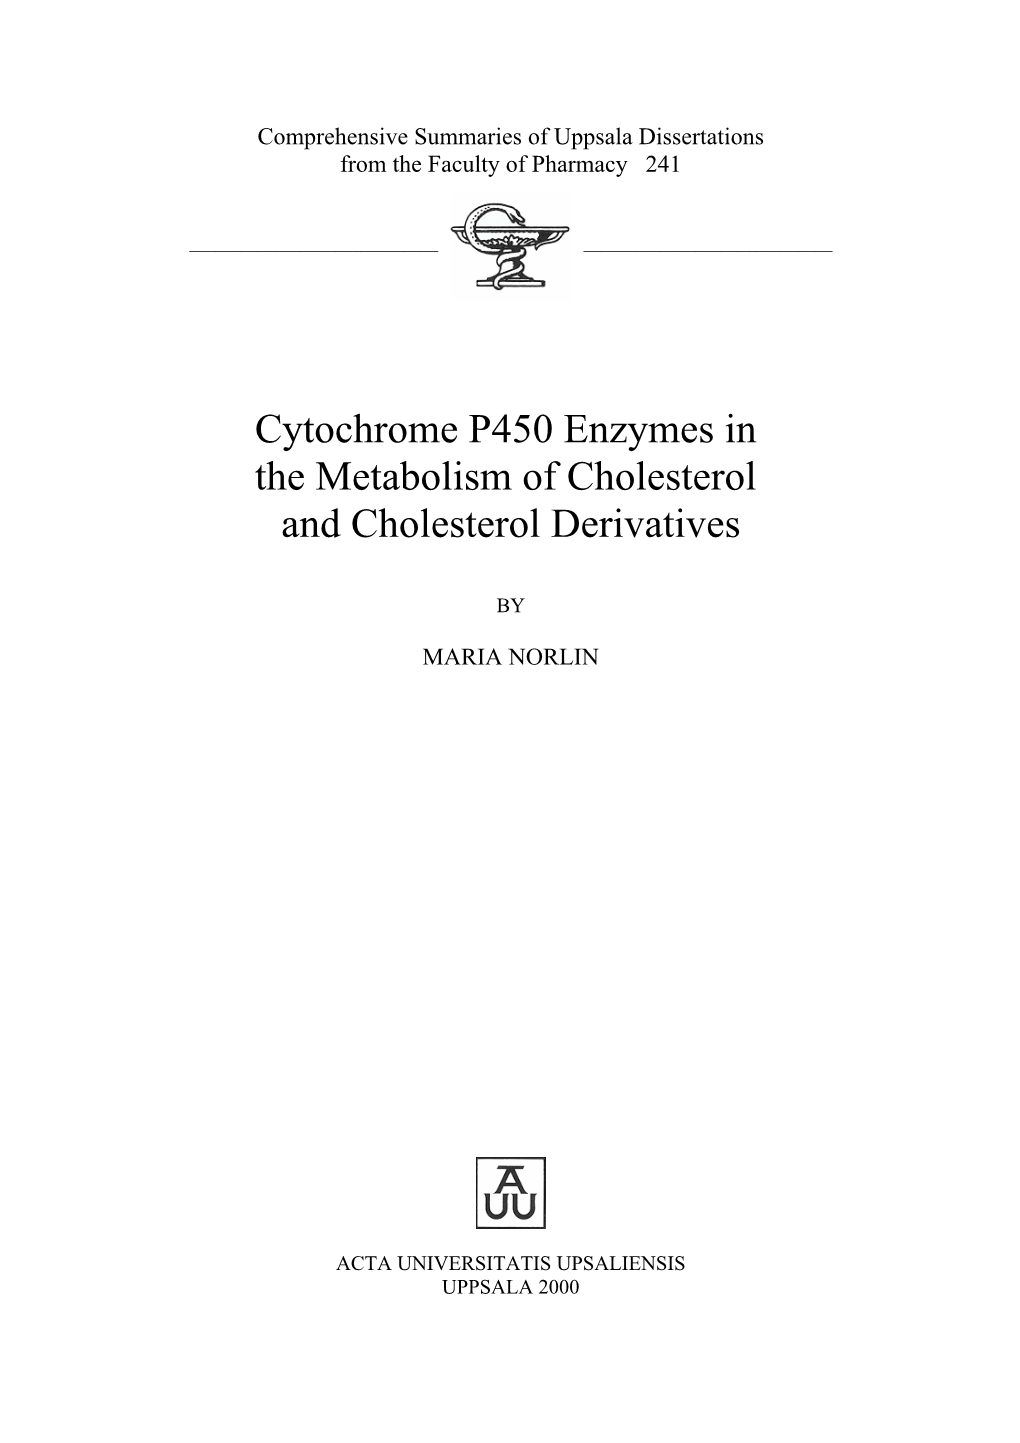 Cytochrome P450 Enzymes in the Metabolism of Cholesterol and Cholesterol Derivatives